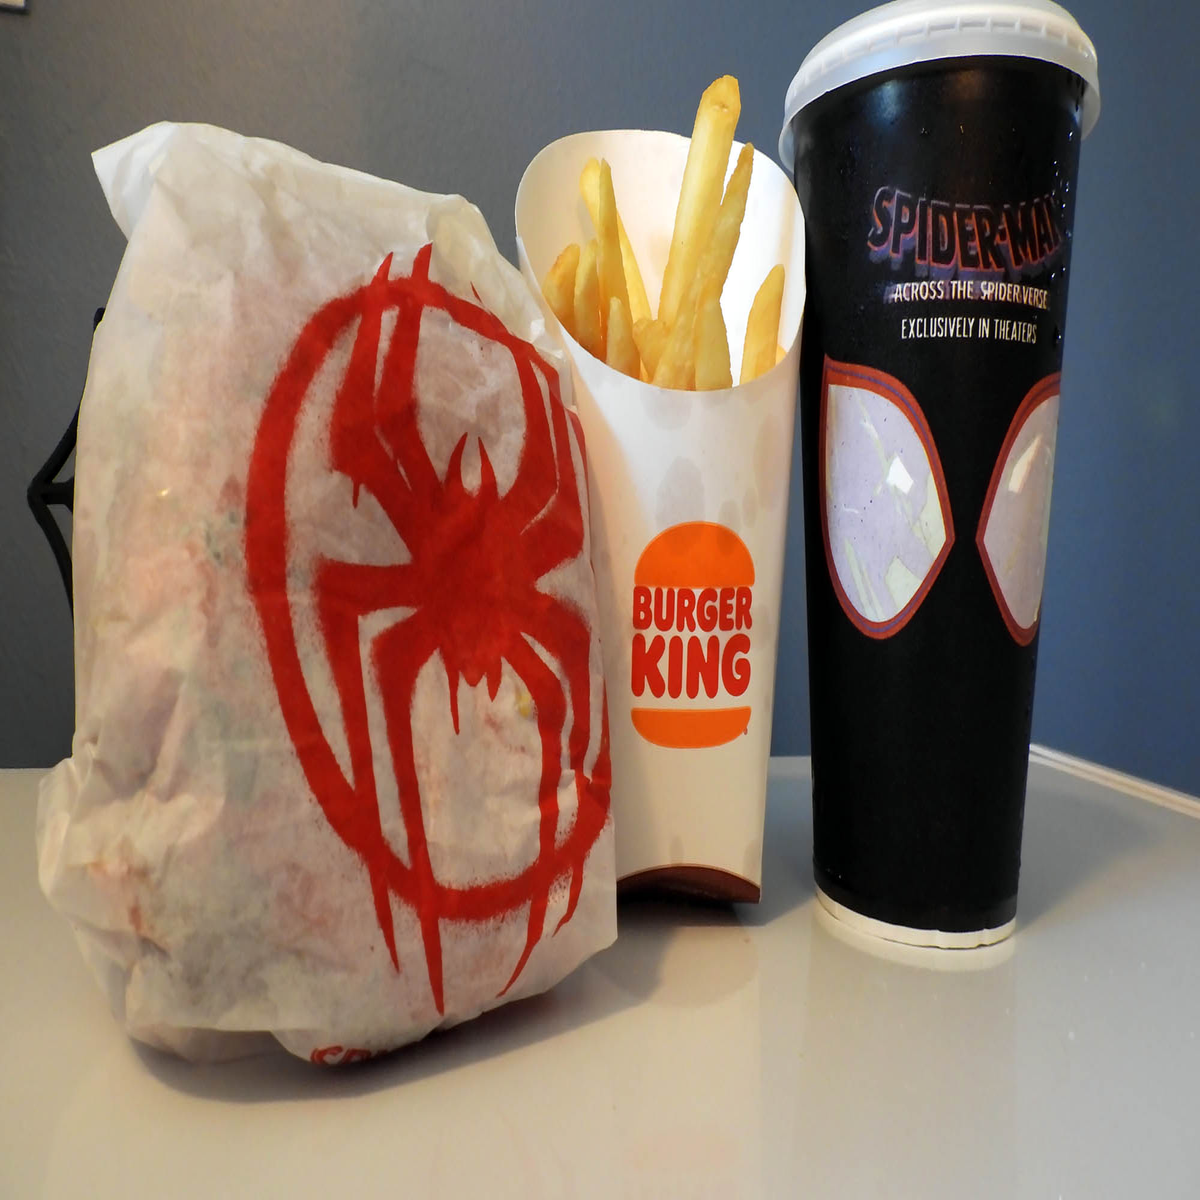 Spider-Verse Whopper / Red 40 Whopper